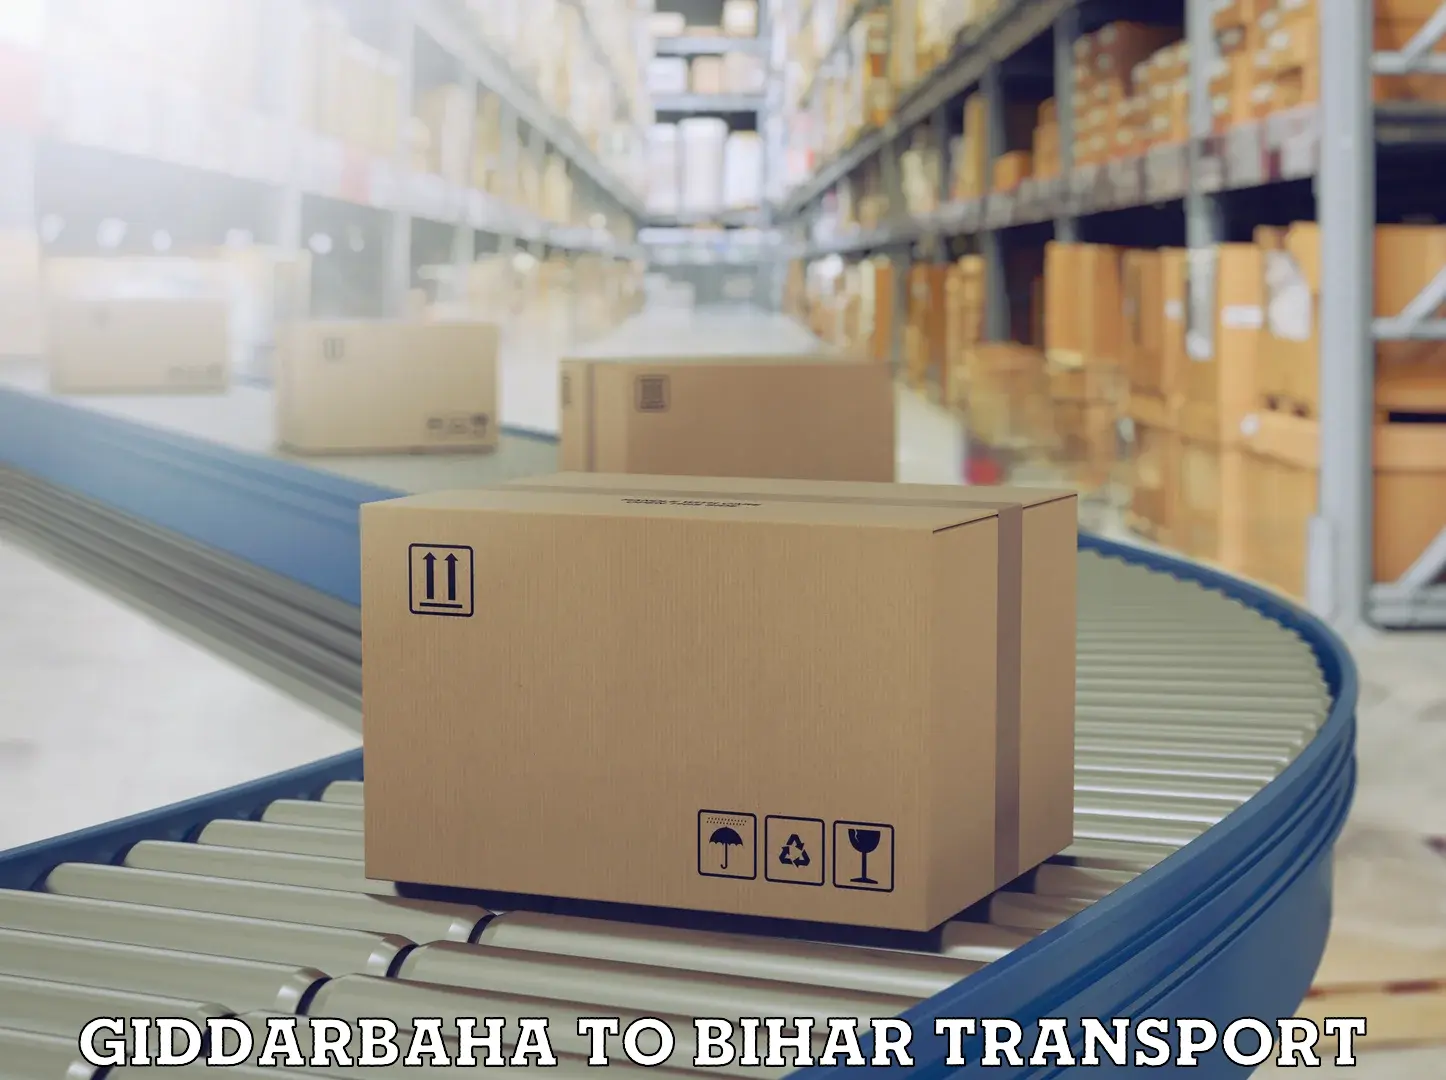 Air freight transport services in Giddarbaha to Banka